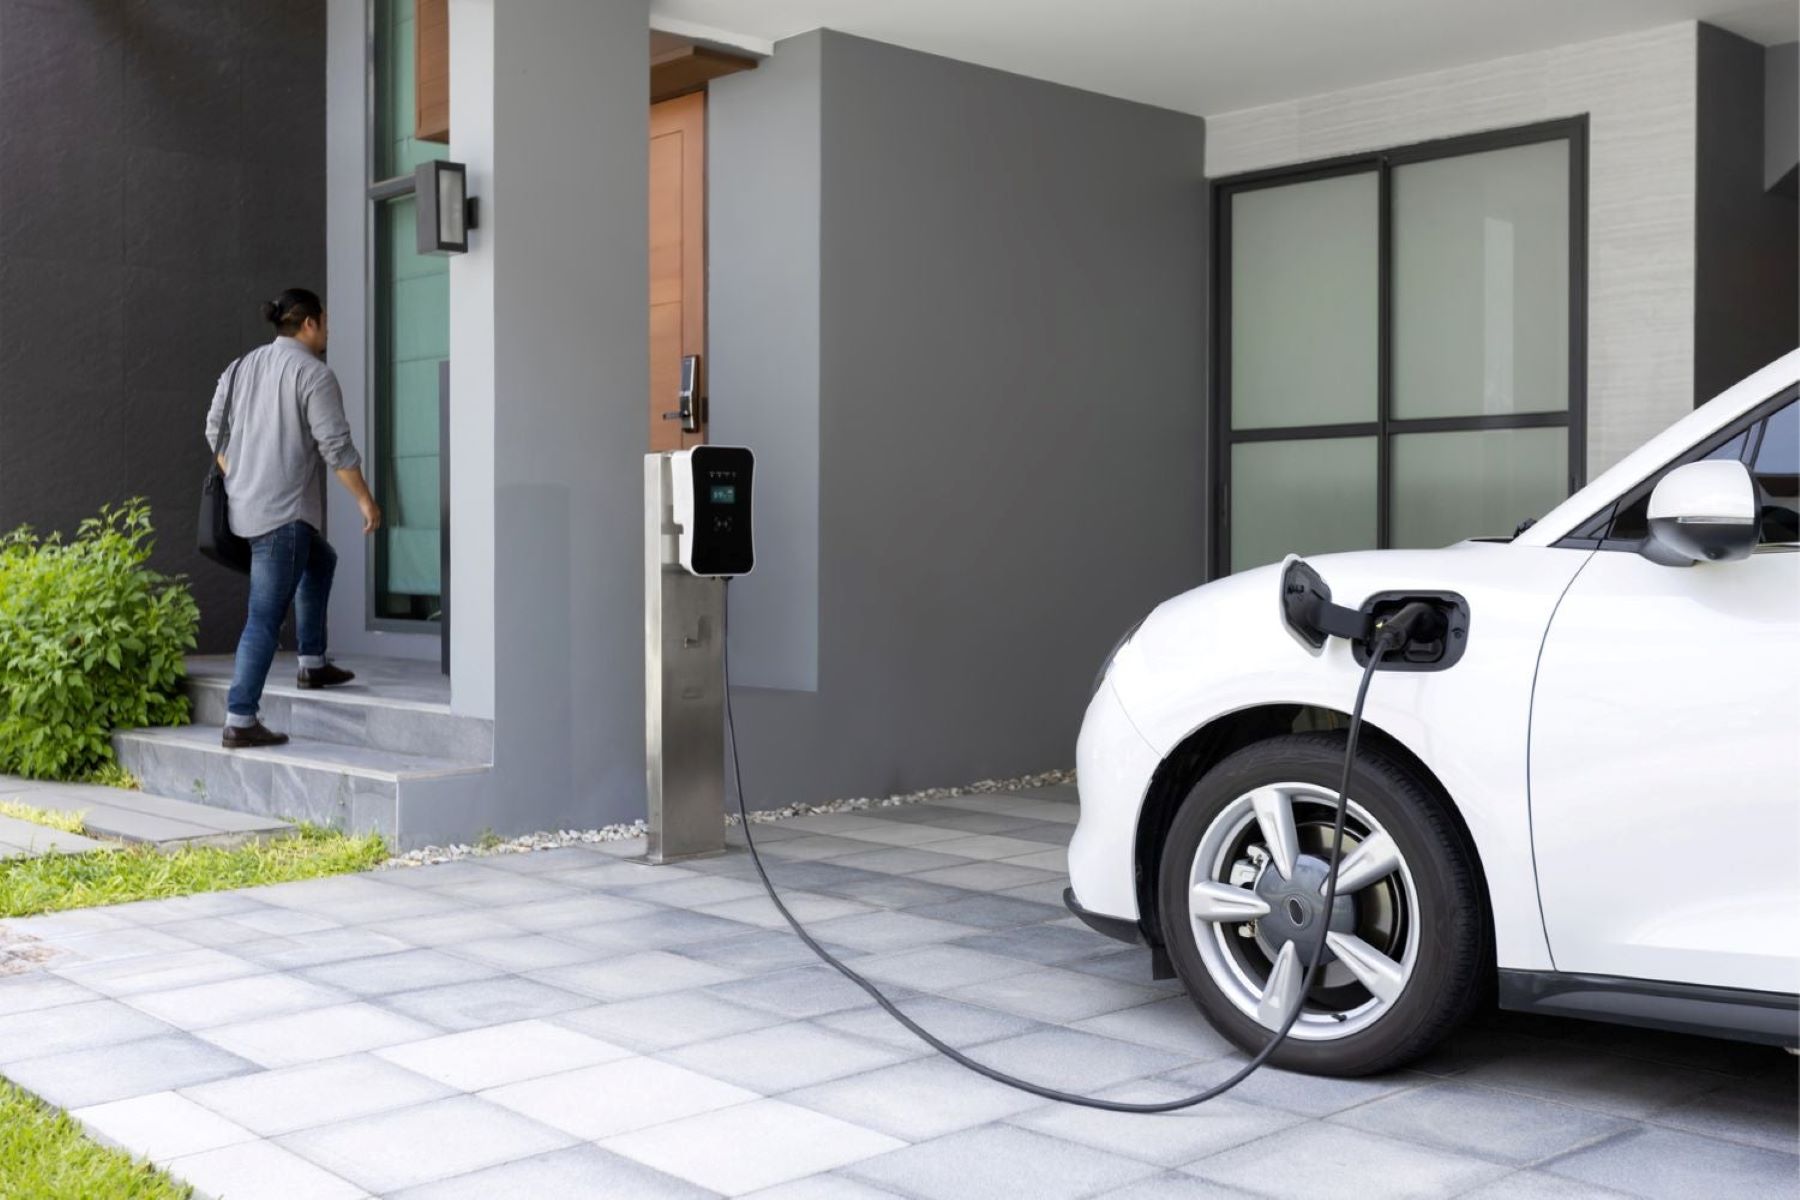 How To Install An EV Charger At Home